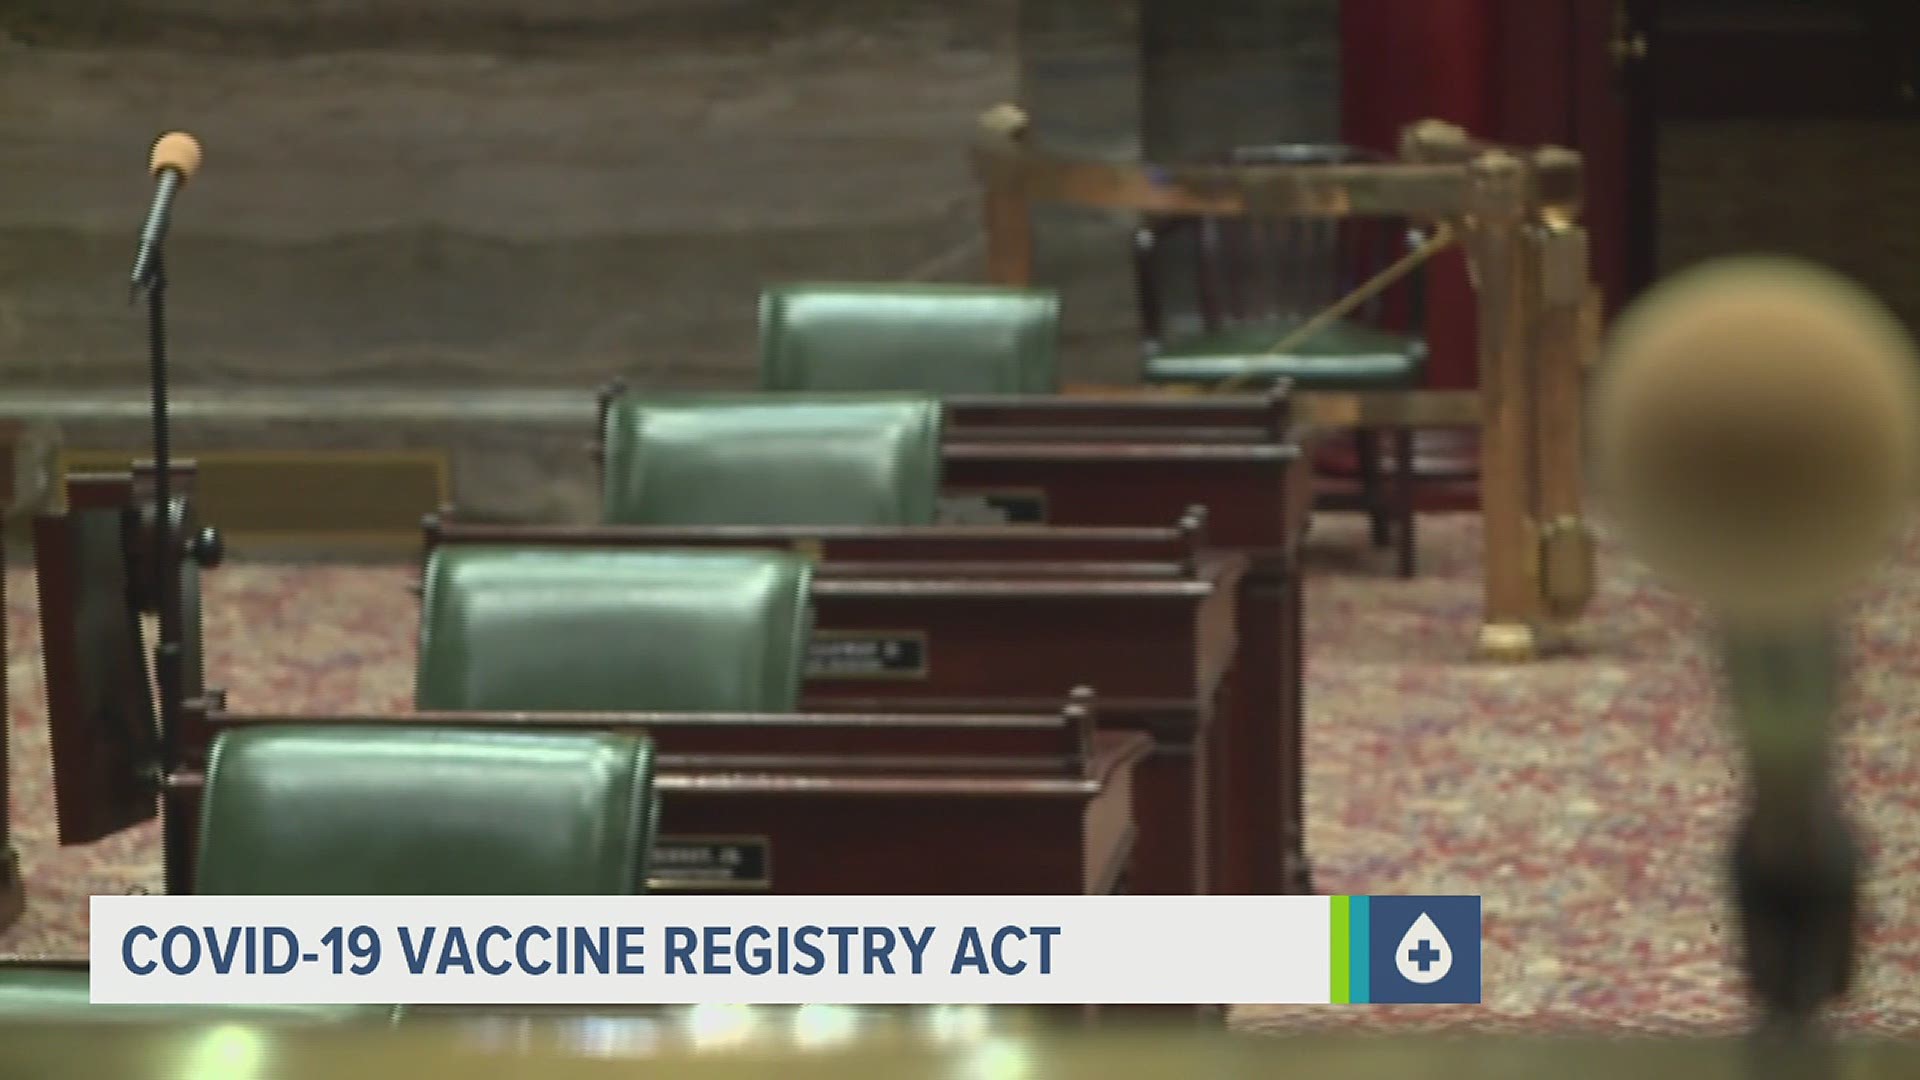 The COVID-19 vaccine registry act will be a statewide database for those eligible and willing to register for the vaccine.